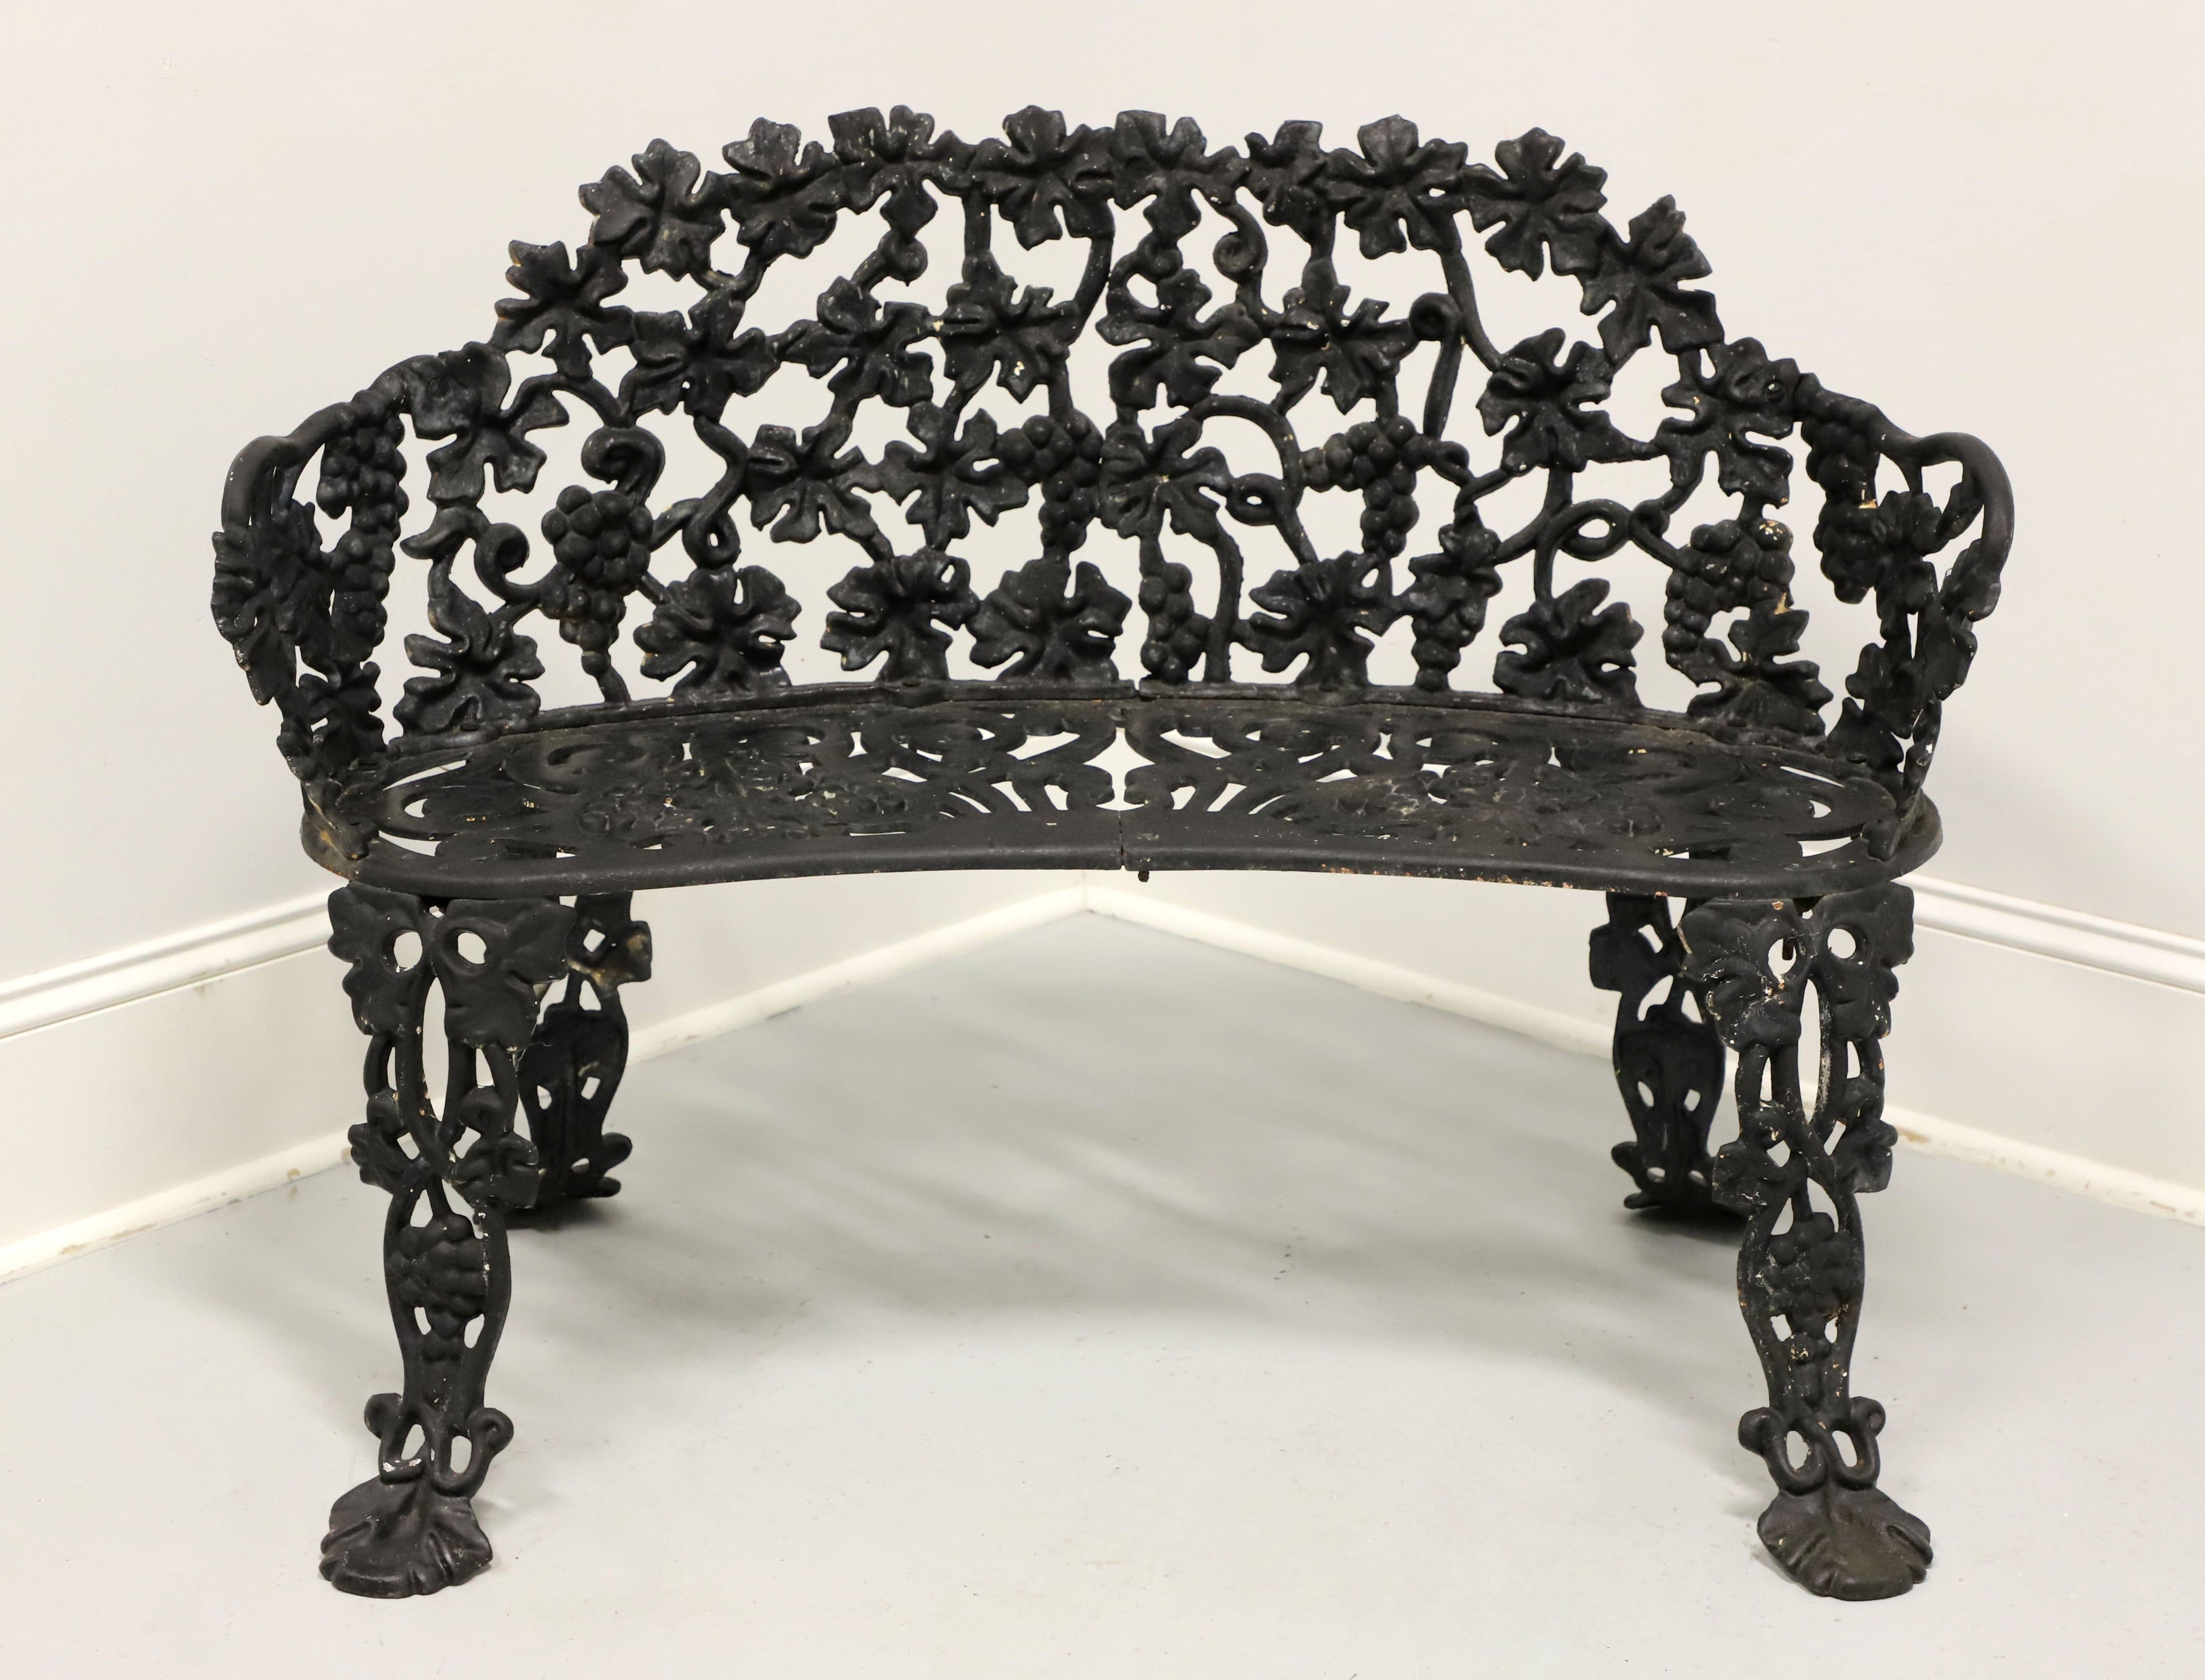 An antique Victorian style grape leaf motif garden four piece patio set, unbranded. Cast iron construction in a pierced Rococo design of grape leaves. Very well made and heavy. Set is ready for use as is or apply a fresh coat of paint. A smaller in